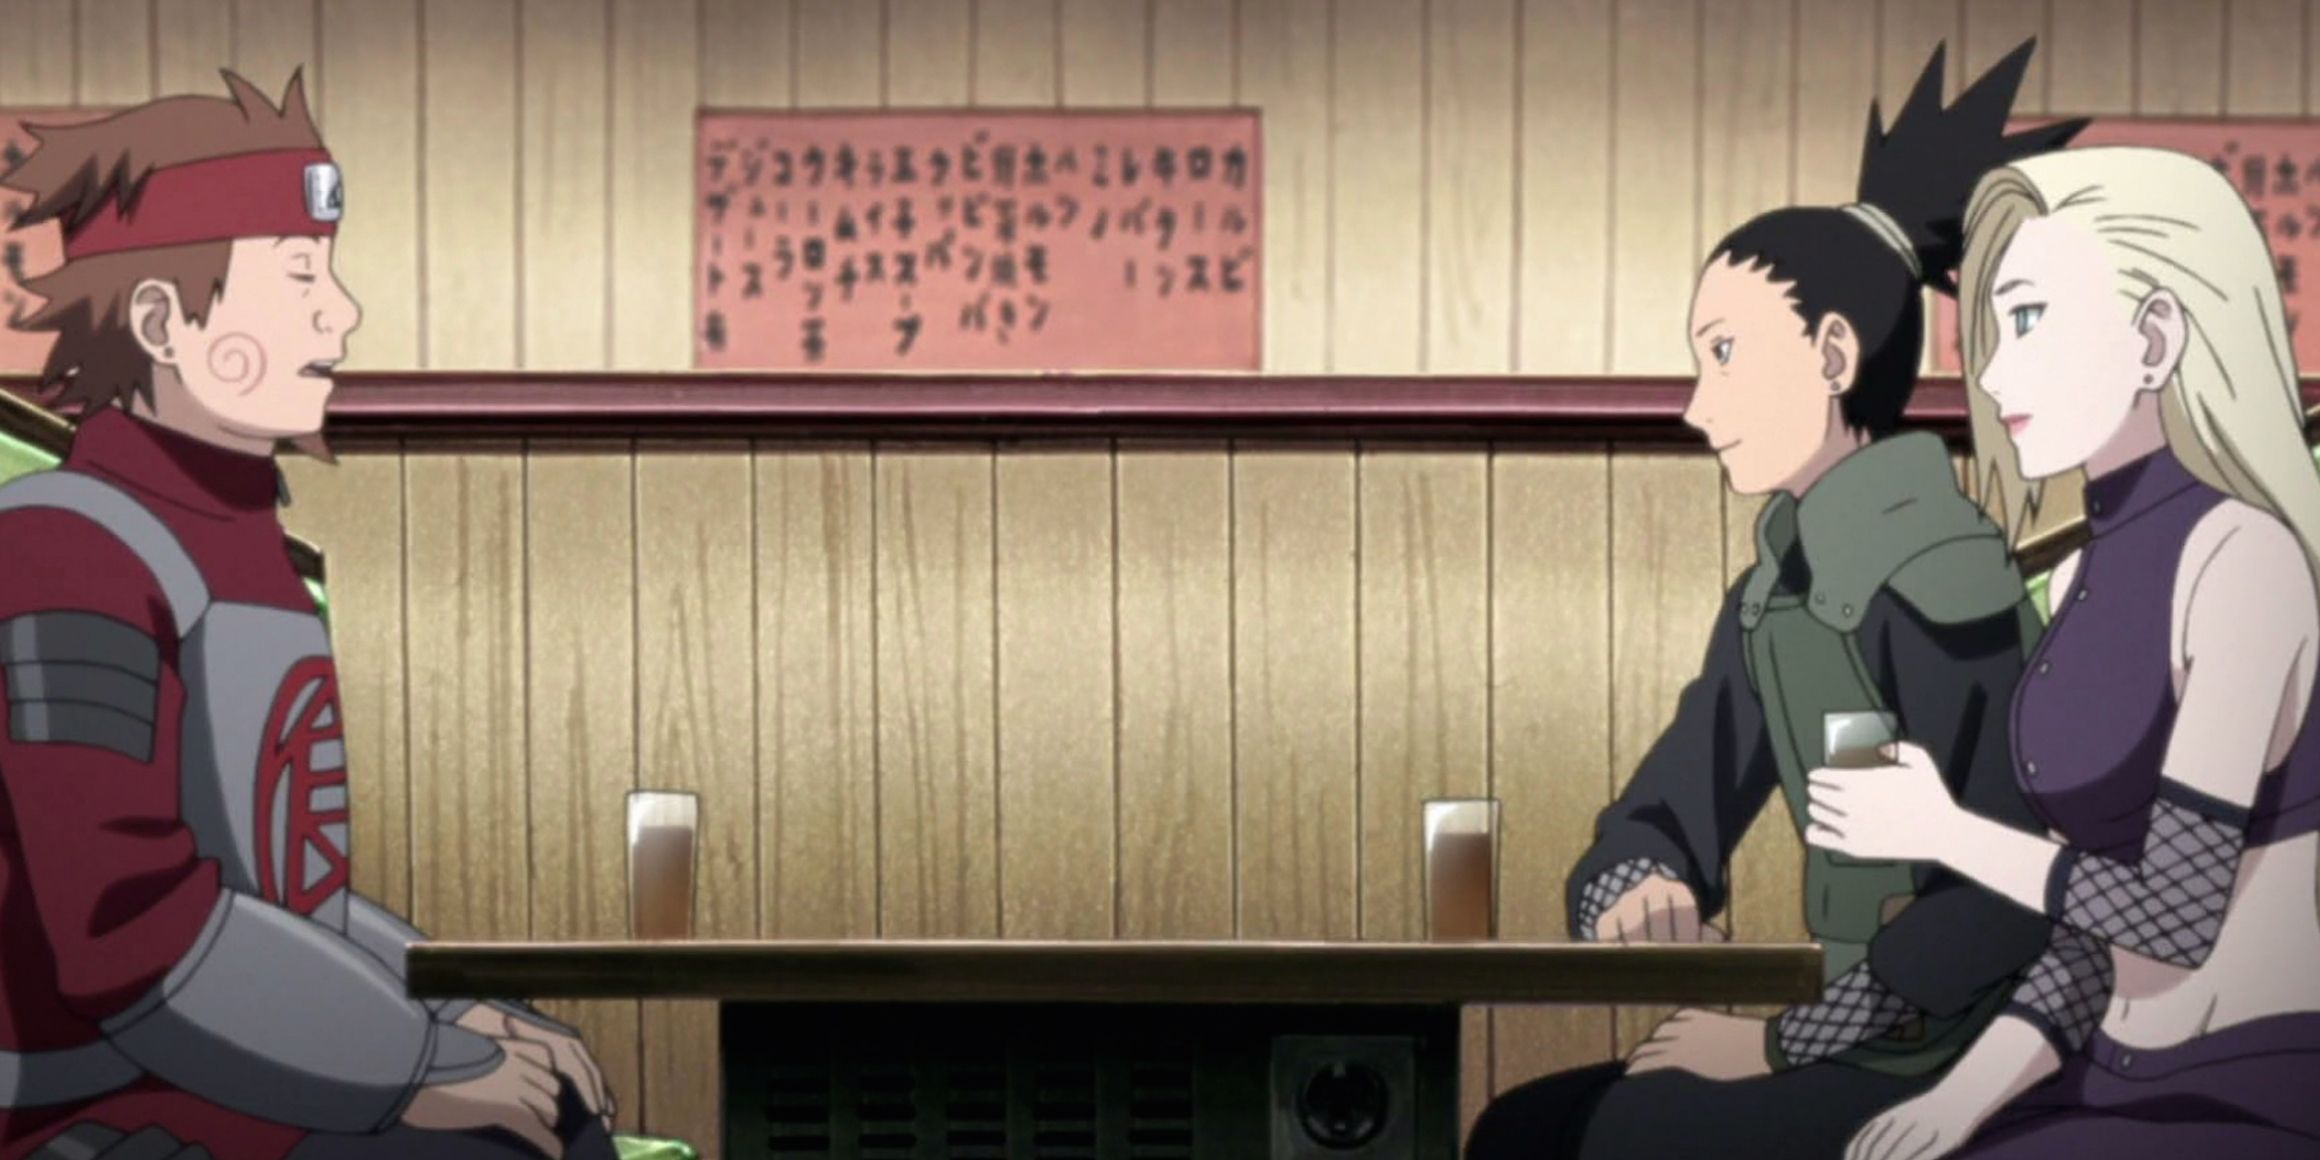 Choji sits across from Shikamaru and Ino in a restaurant during the Naruto Blank Period